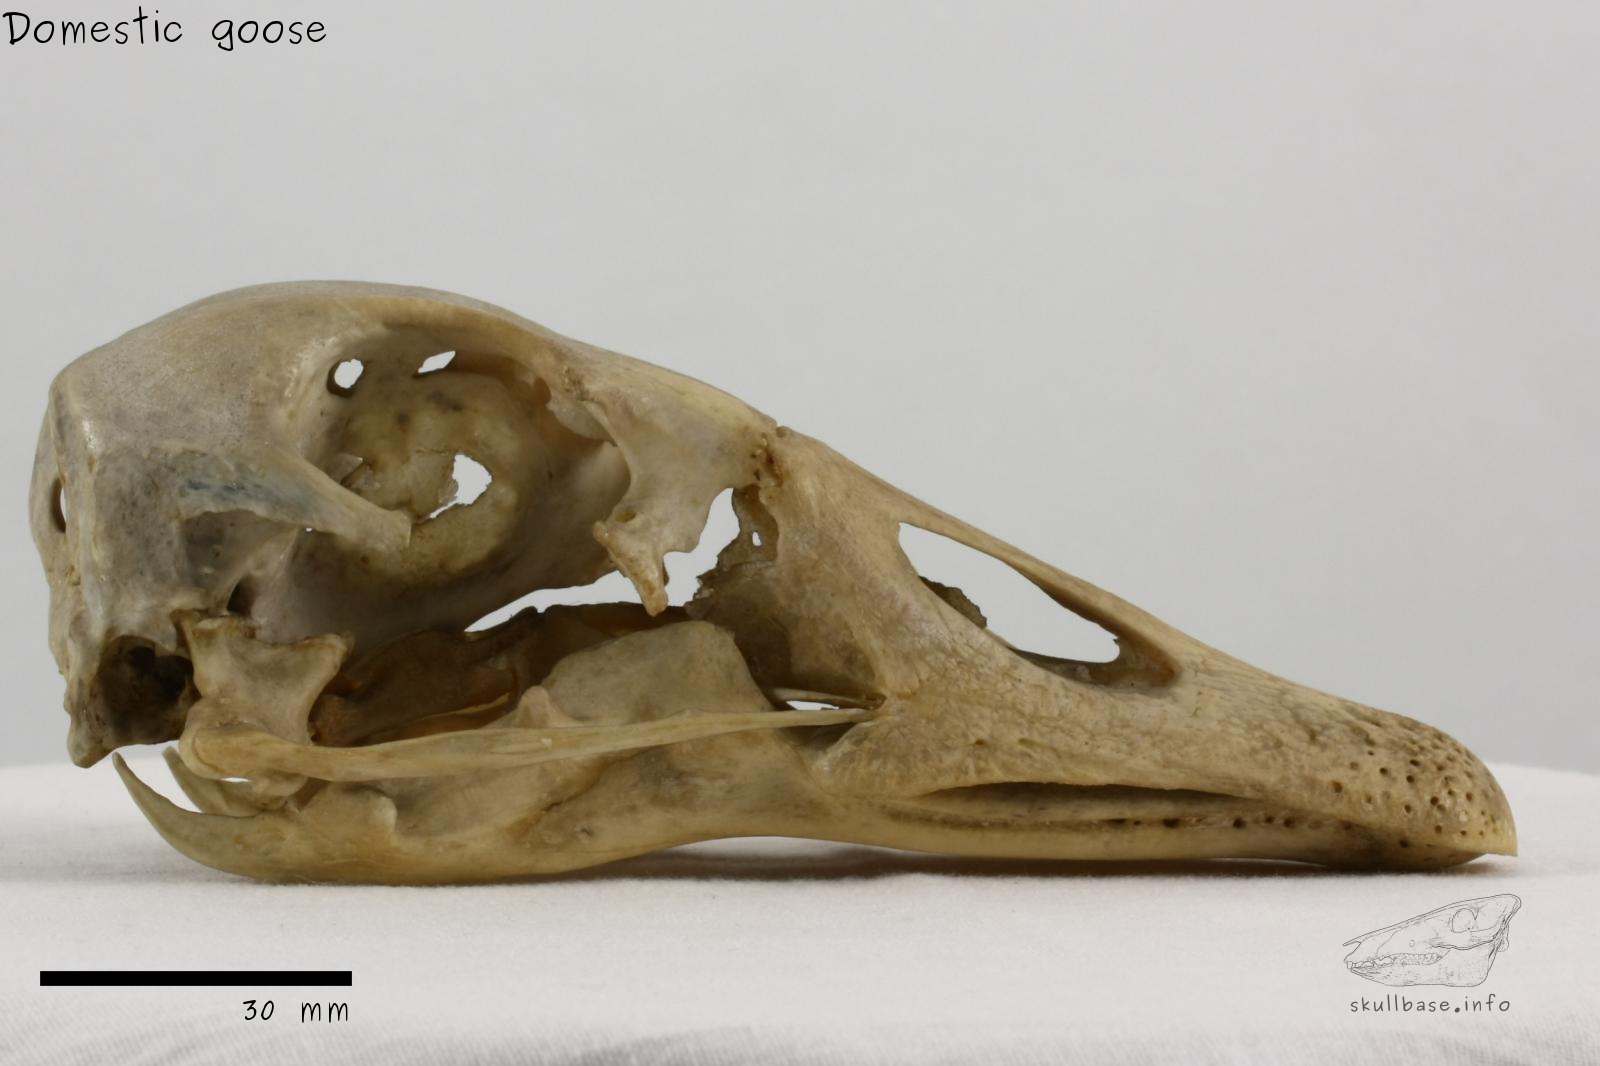 Domestic goose (Anser anser domesticus) skull lateral view